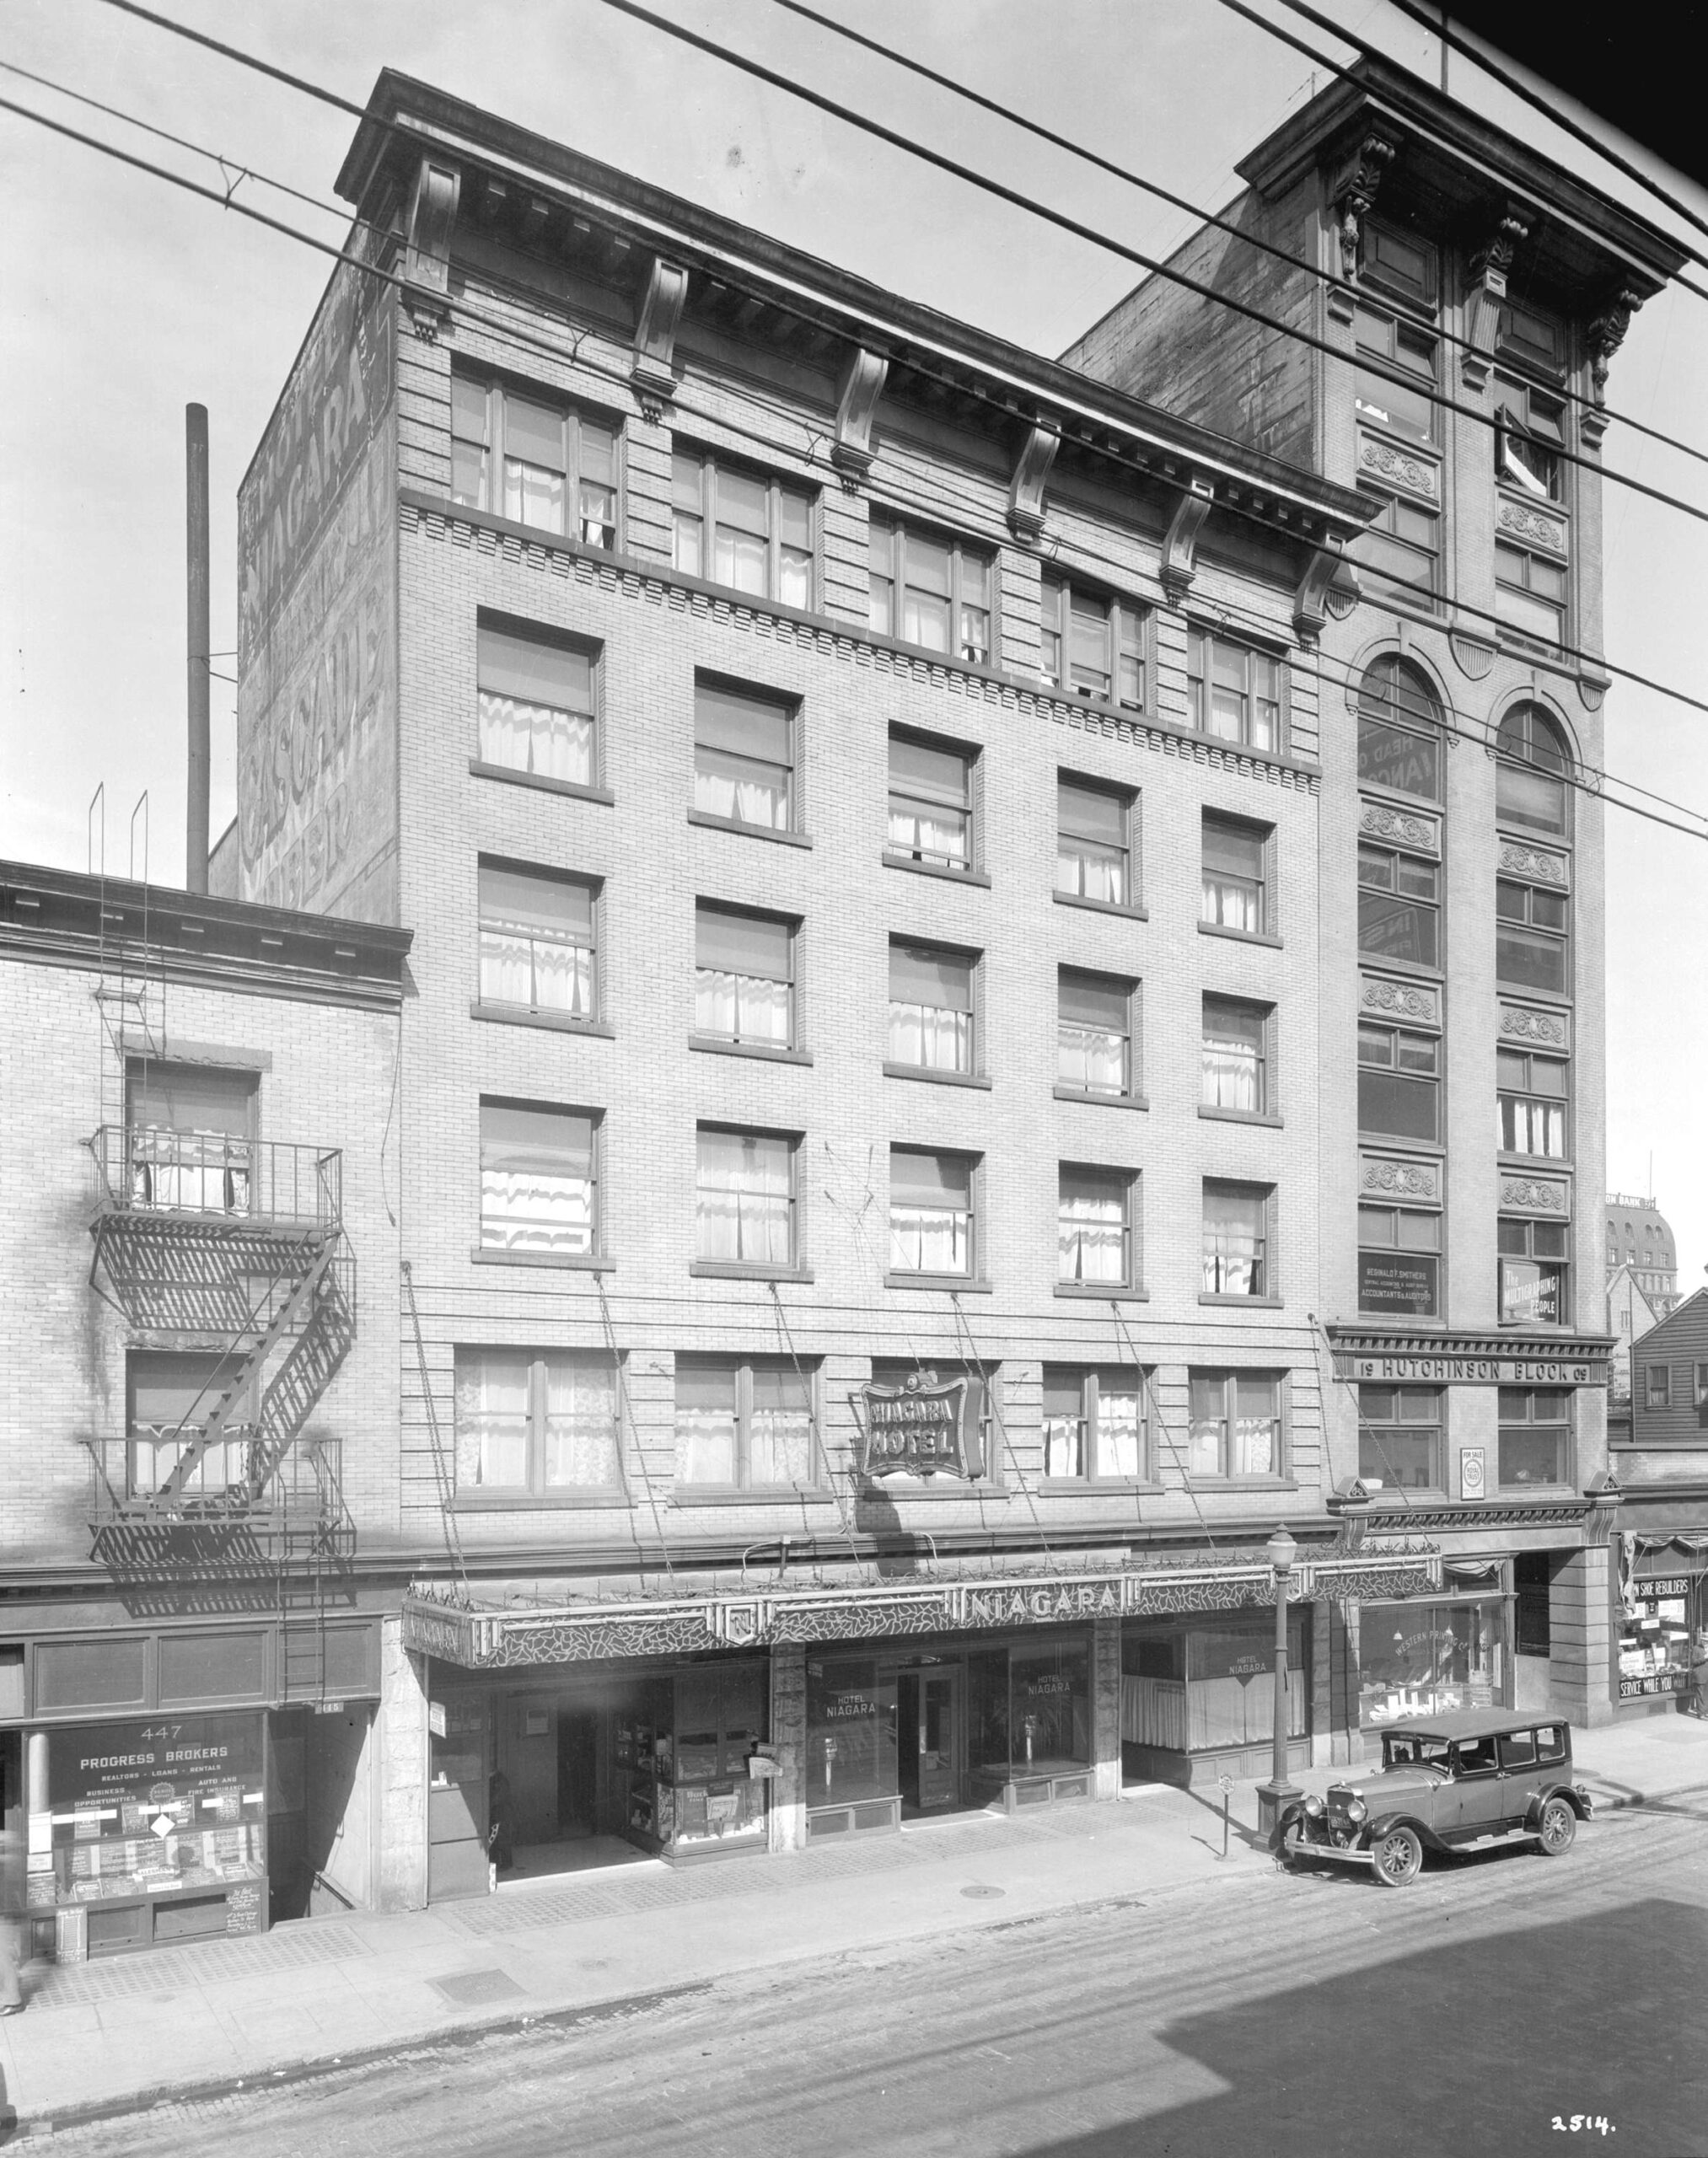 The Hutchinson Block designed by architect W.F. Gardiner is the tall skinny building at the very right of the photo, as seen in 1932. Reference code: AM1535-: CVA 99-4179